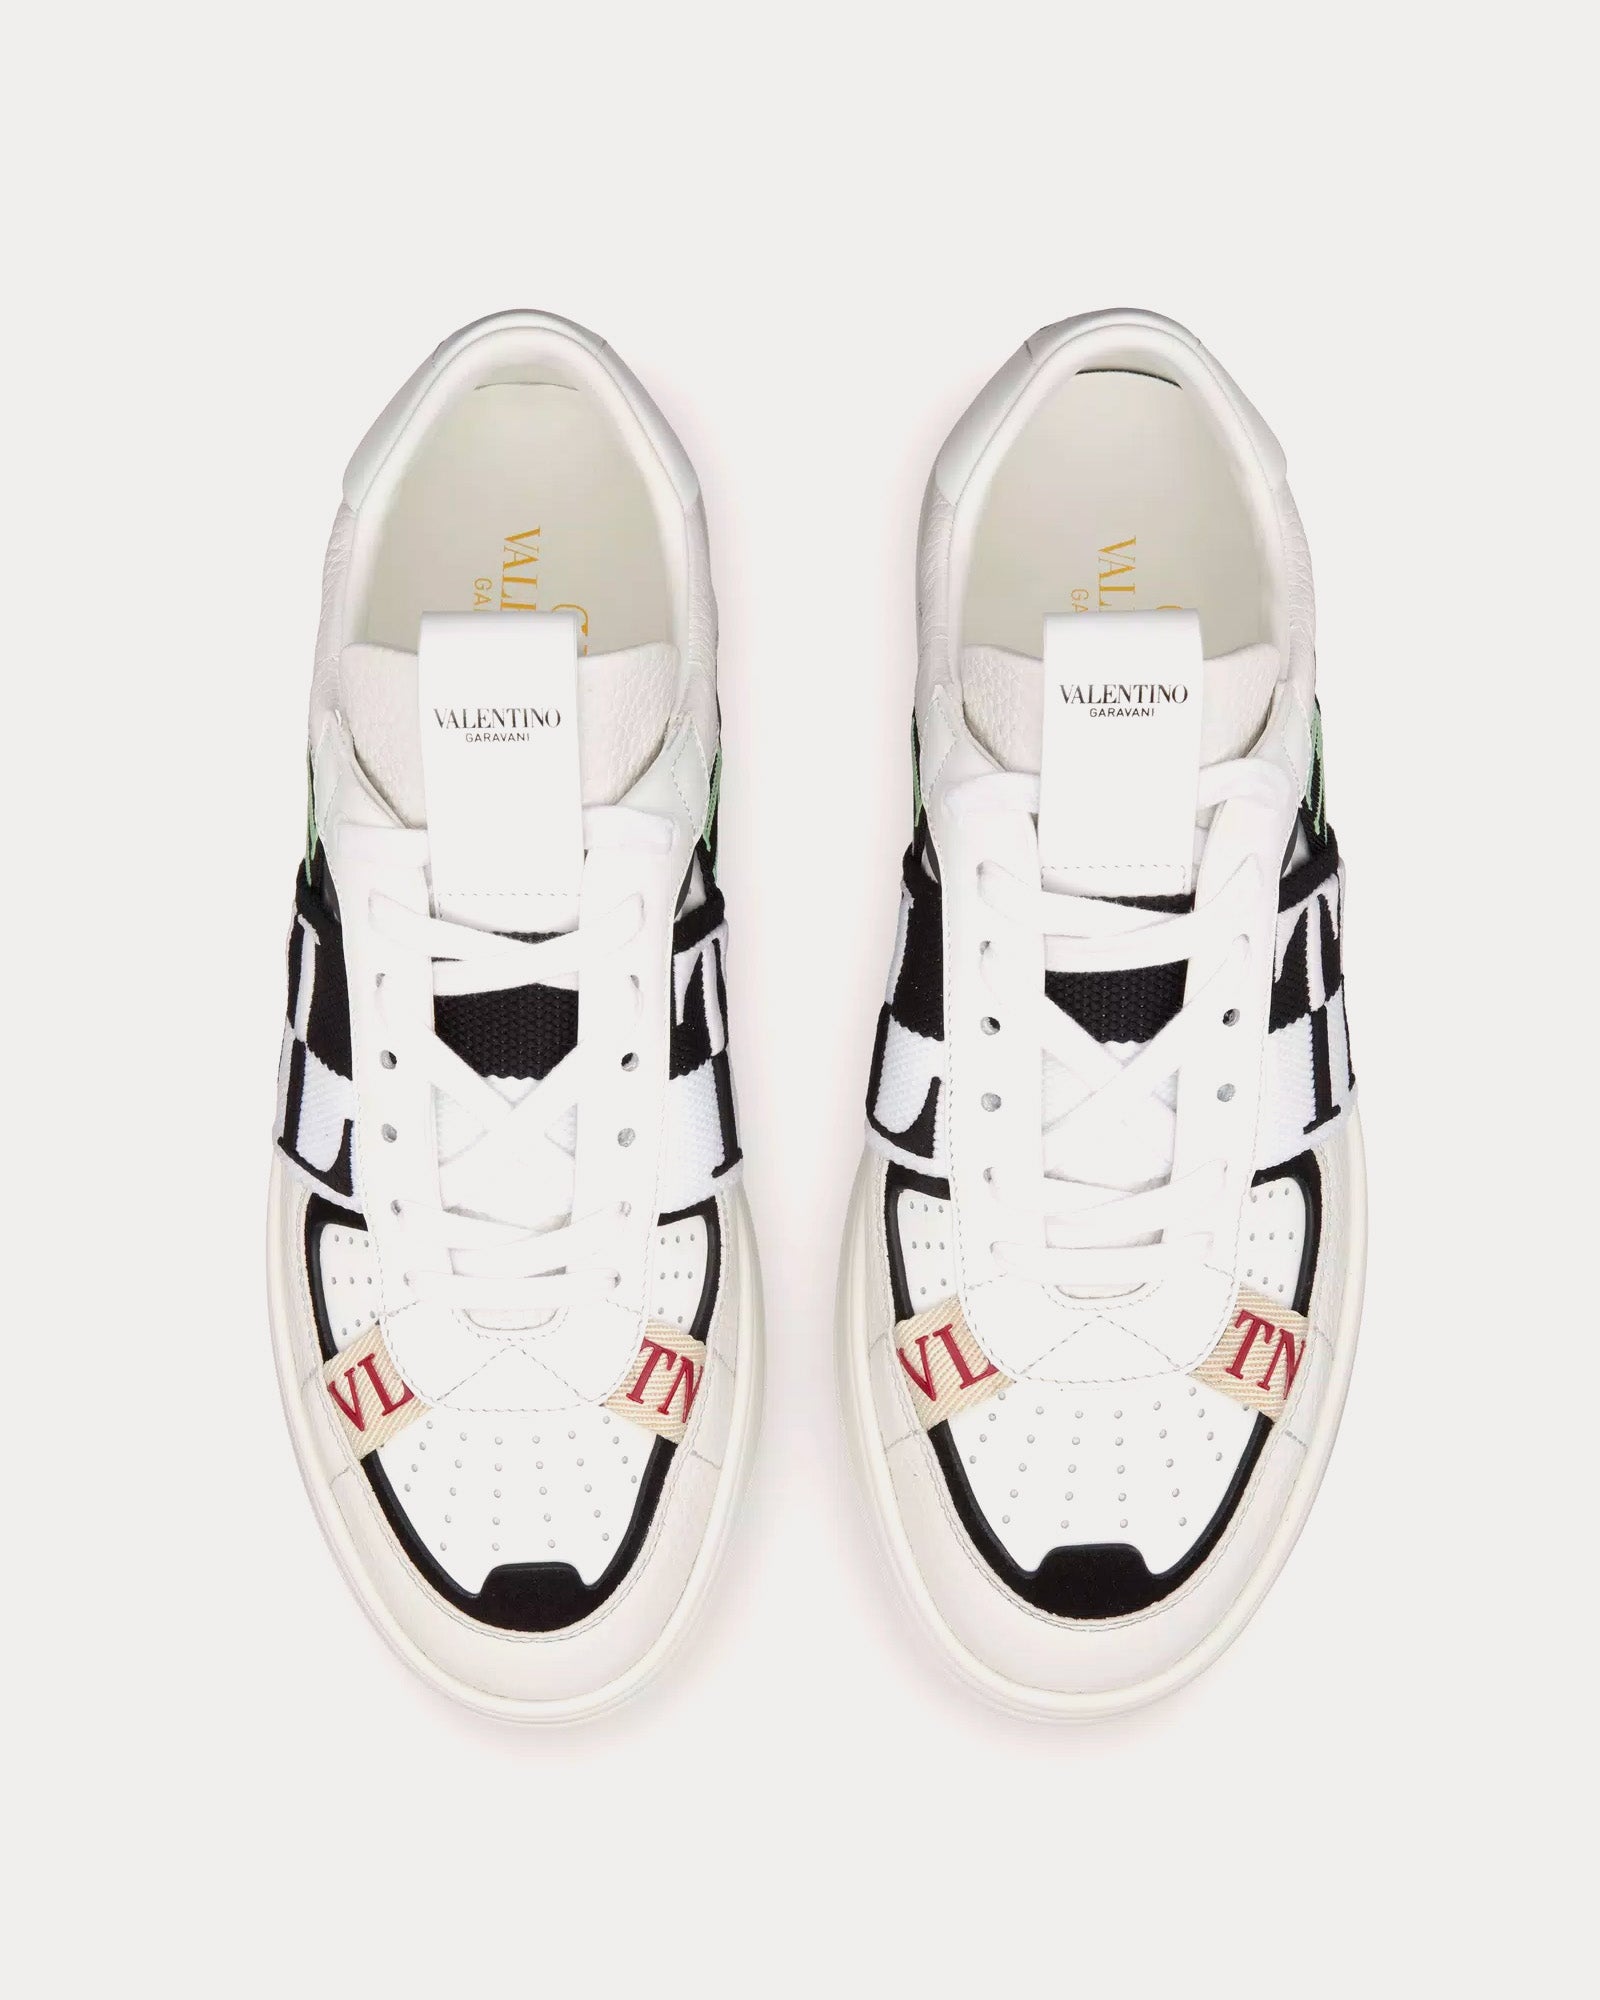 Valentino - VL7N Calfskin & Fabric Banded White / Black / Mint / Ruby Low Top Sneakers